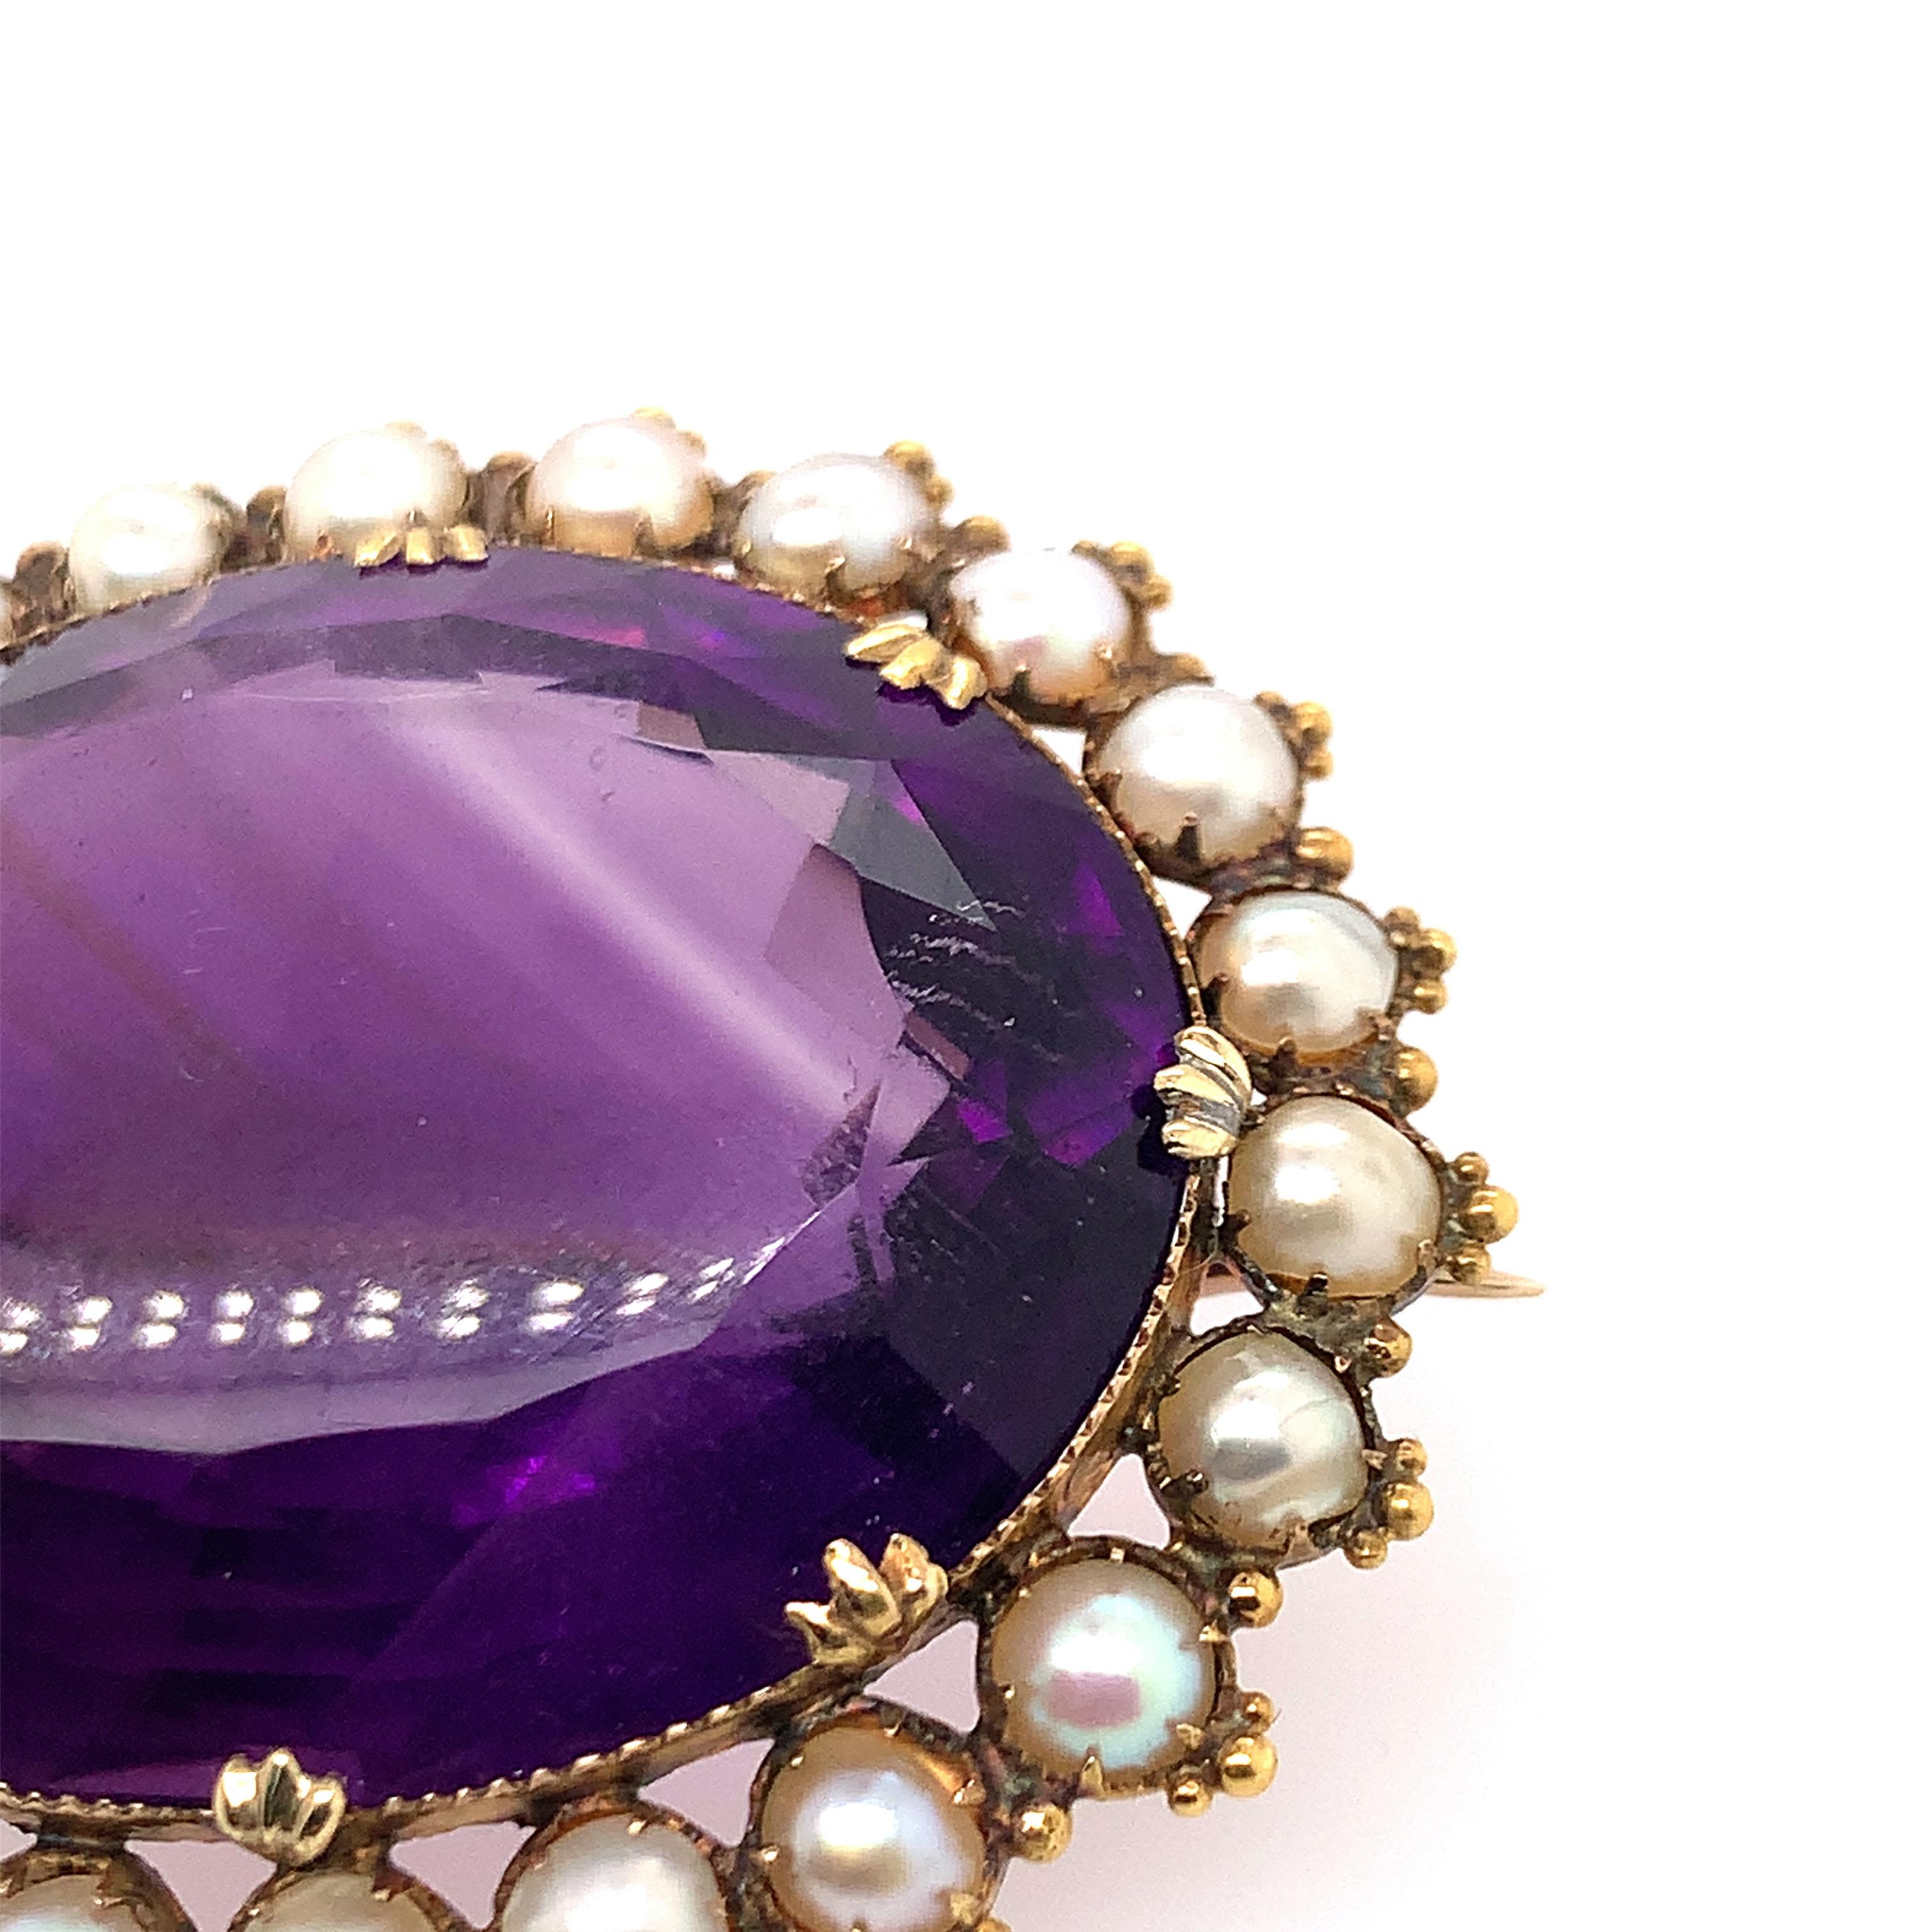 Centering a large oval amethyst weighing approximately 66.00 carats, the scalloped frame accented with split-pearls, in 18k gold
Weight: 20.2 grams
Brooch measuring 45 x 37 mm

Amethyst of a medium tone of strong purple colour, good clarity, good